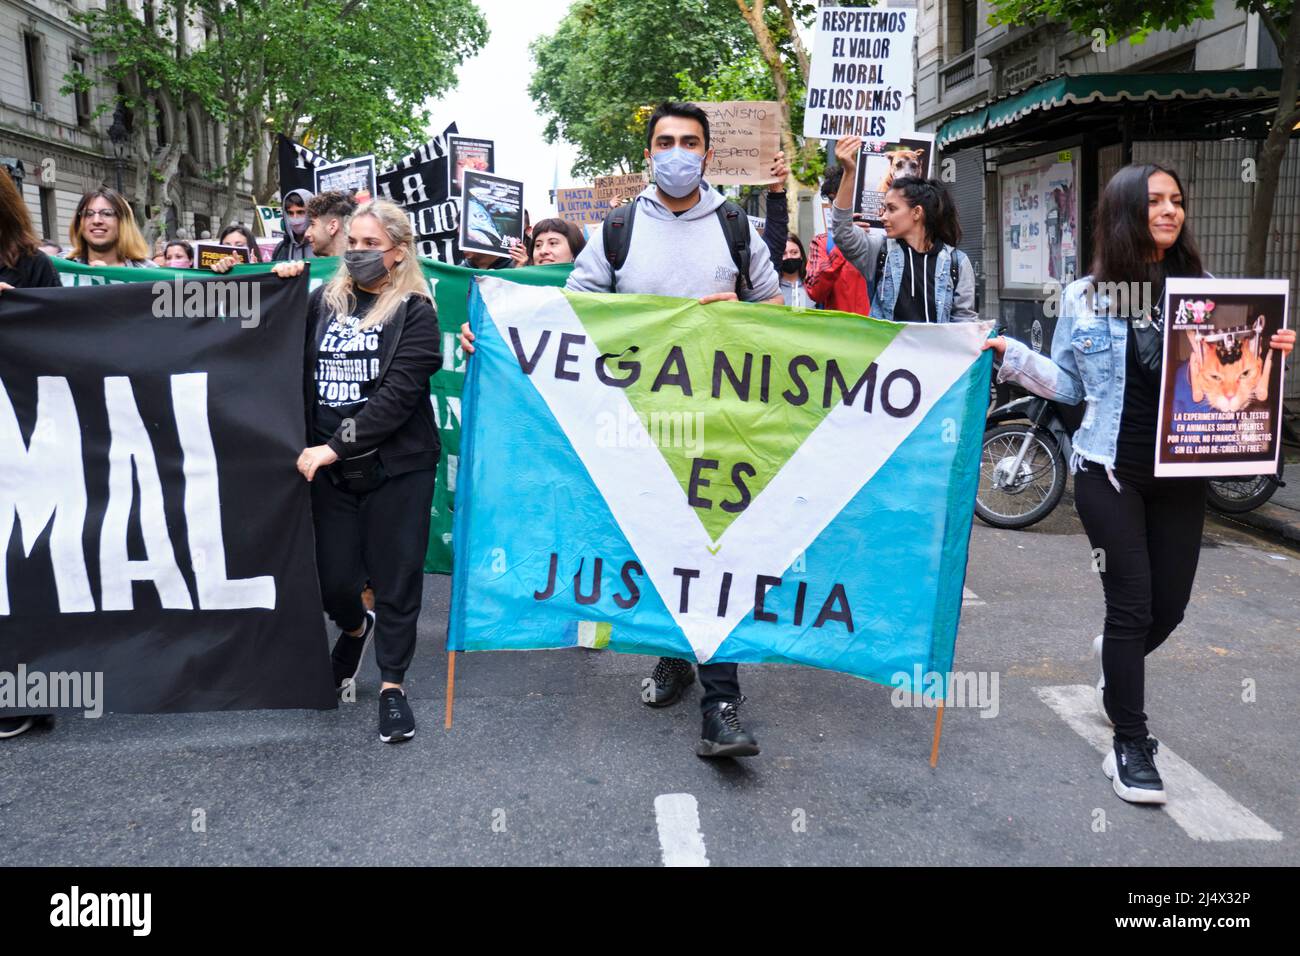 Buenos Aires, Argentina; Nov 1, 2021: World Vegan Day demonstration. Young people marching, man holding a banner: Veganism is justice. Stock Photo